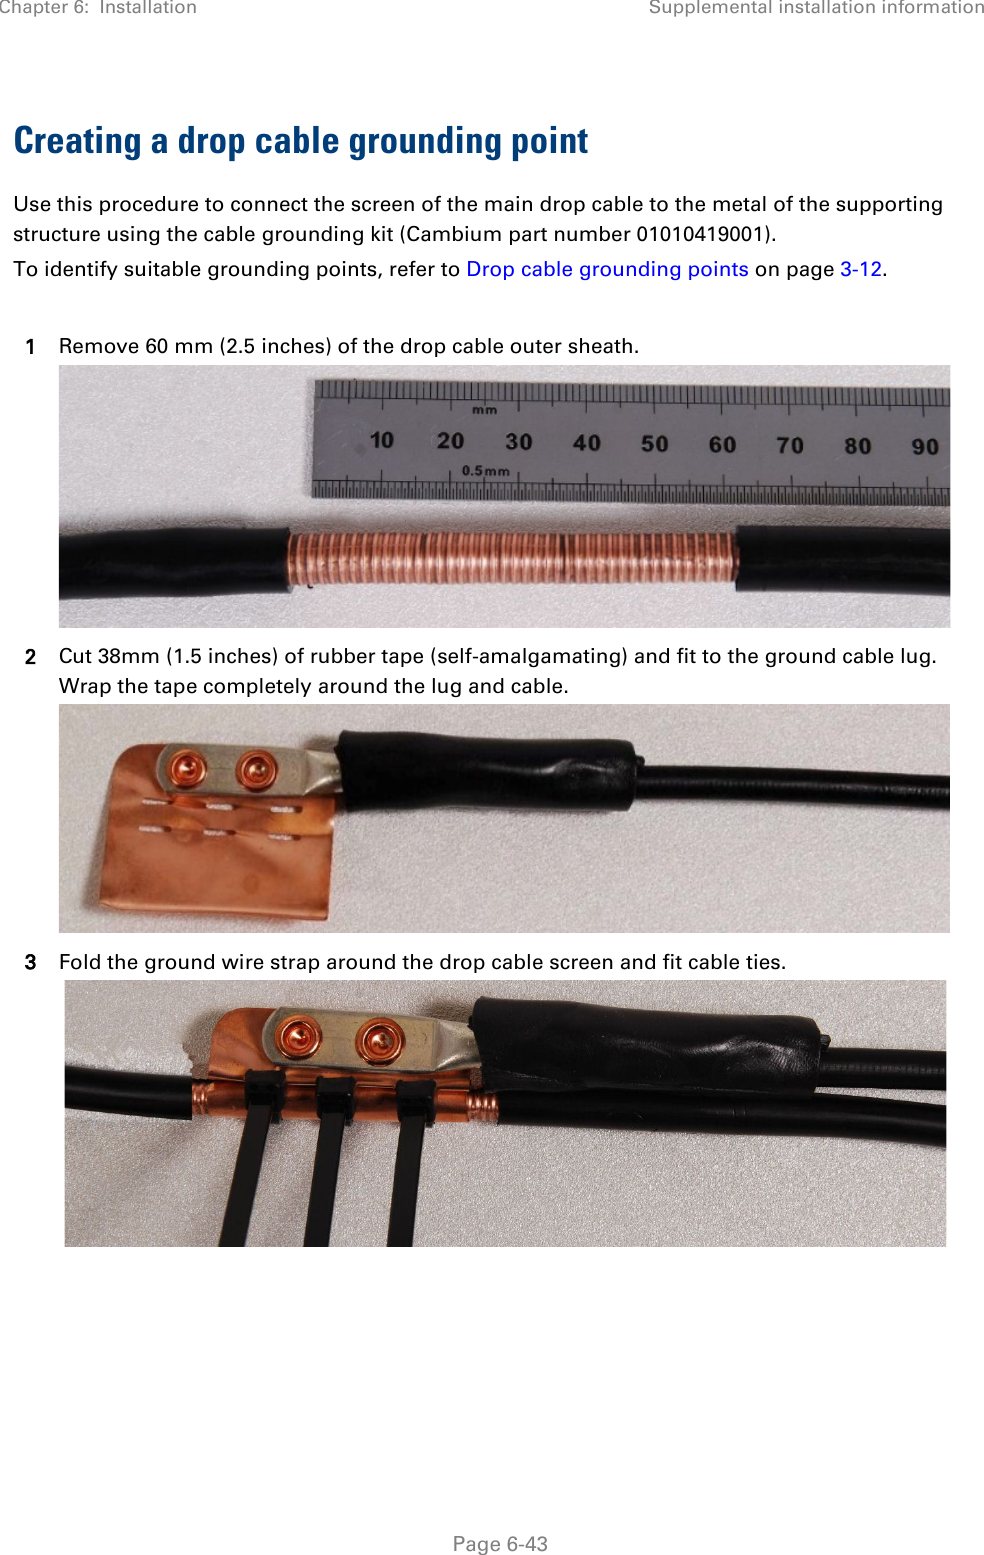 Chapter 6:  Installation Supplemental installation information   Page 6-43 Creating a drop cable grounding point Use this procedure to connect the screen of the main drop cable to the metal of the supporting structure using the cable grounding kit (Cambium part number 01010419001). To identify suitable grounding points, refer to Drop cable grounding points on page 3-12.  1 Remove 60 mm (2.5 inches) of the drop cable outer sheath.  2 Cut 38mm (1.5 inches) of rubber tape (self-amalgamating) and fit to the ground cable lug. Wrap the tape completely around the lug and cable.  3 Fold the ground wire strap around the drop cable screen and fit cable ties.    